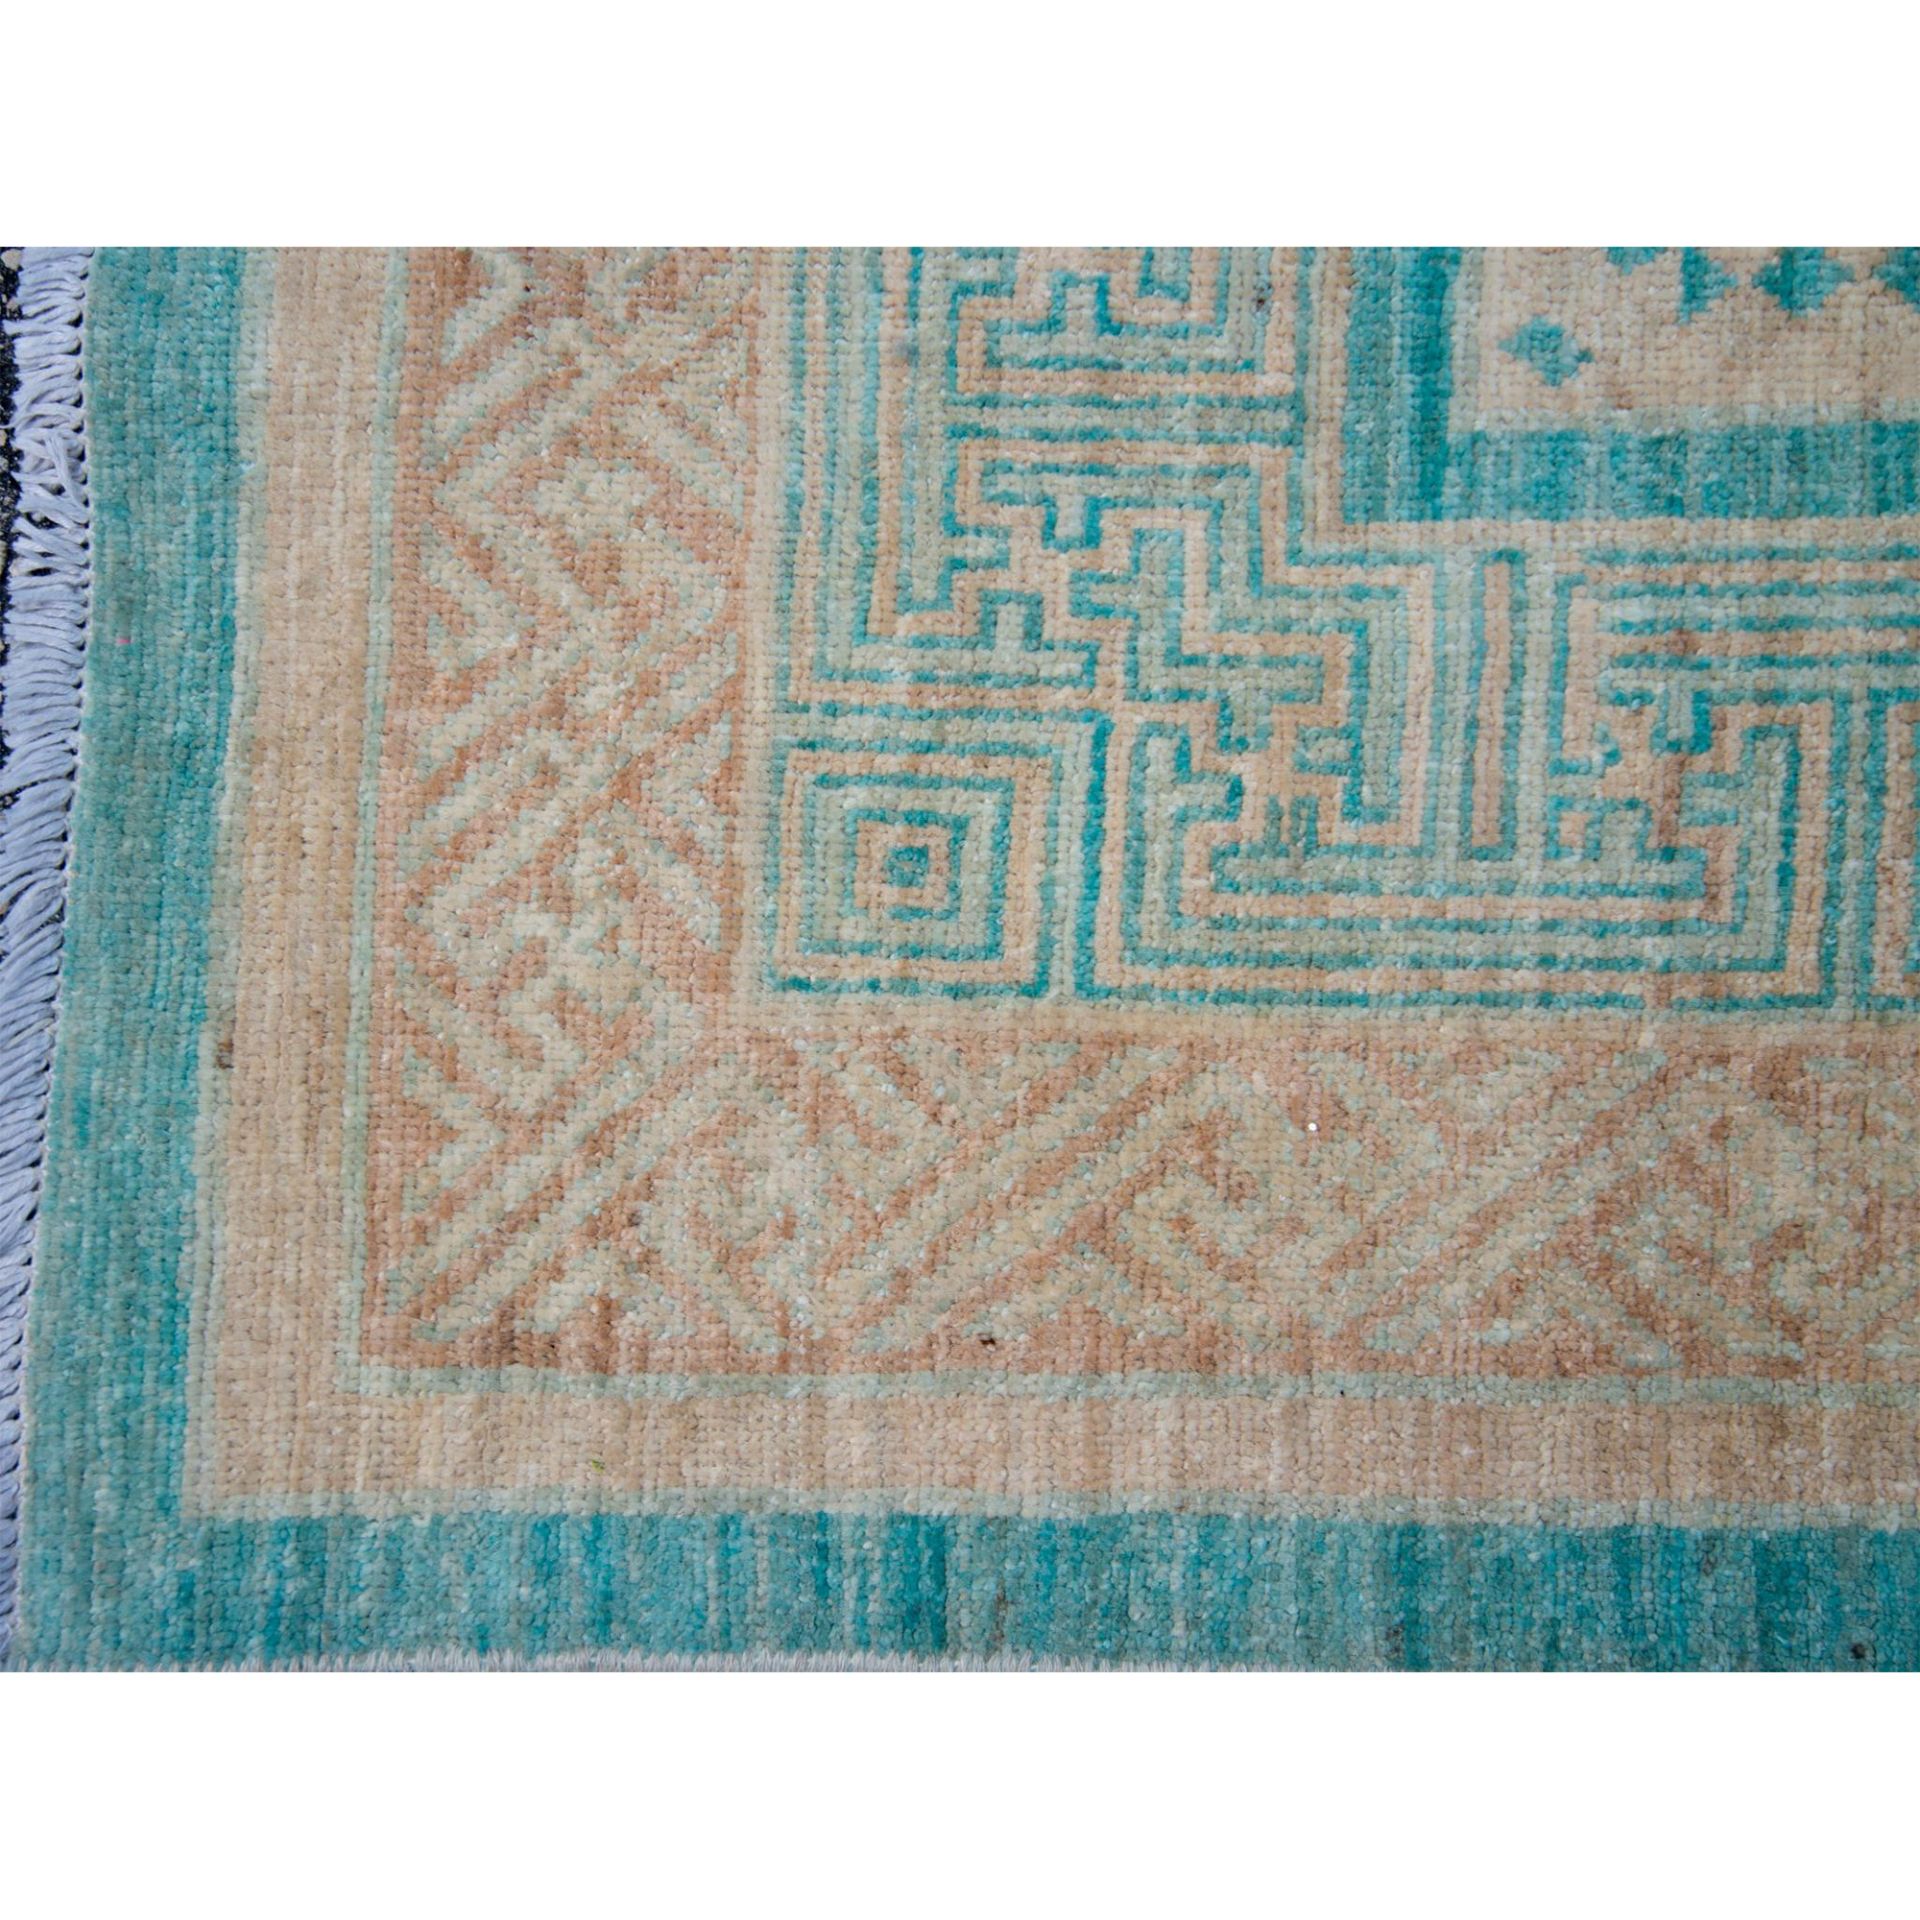 Middle Eastern 100-Percent Hand Woven Wool Rug - Image 4 of 7